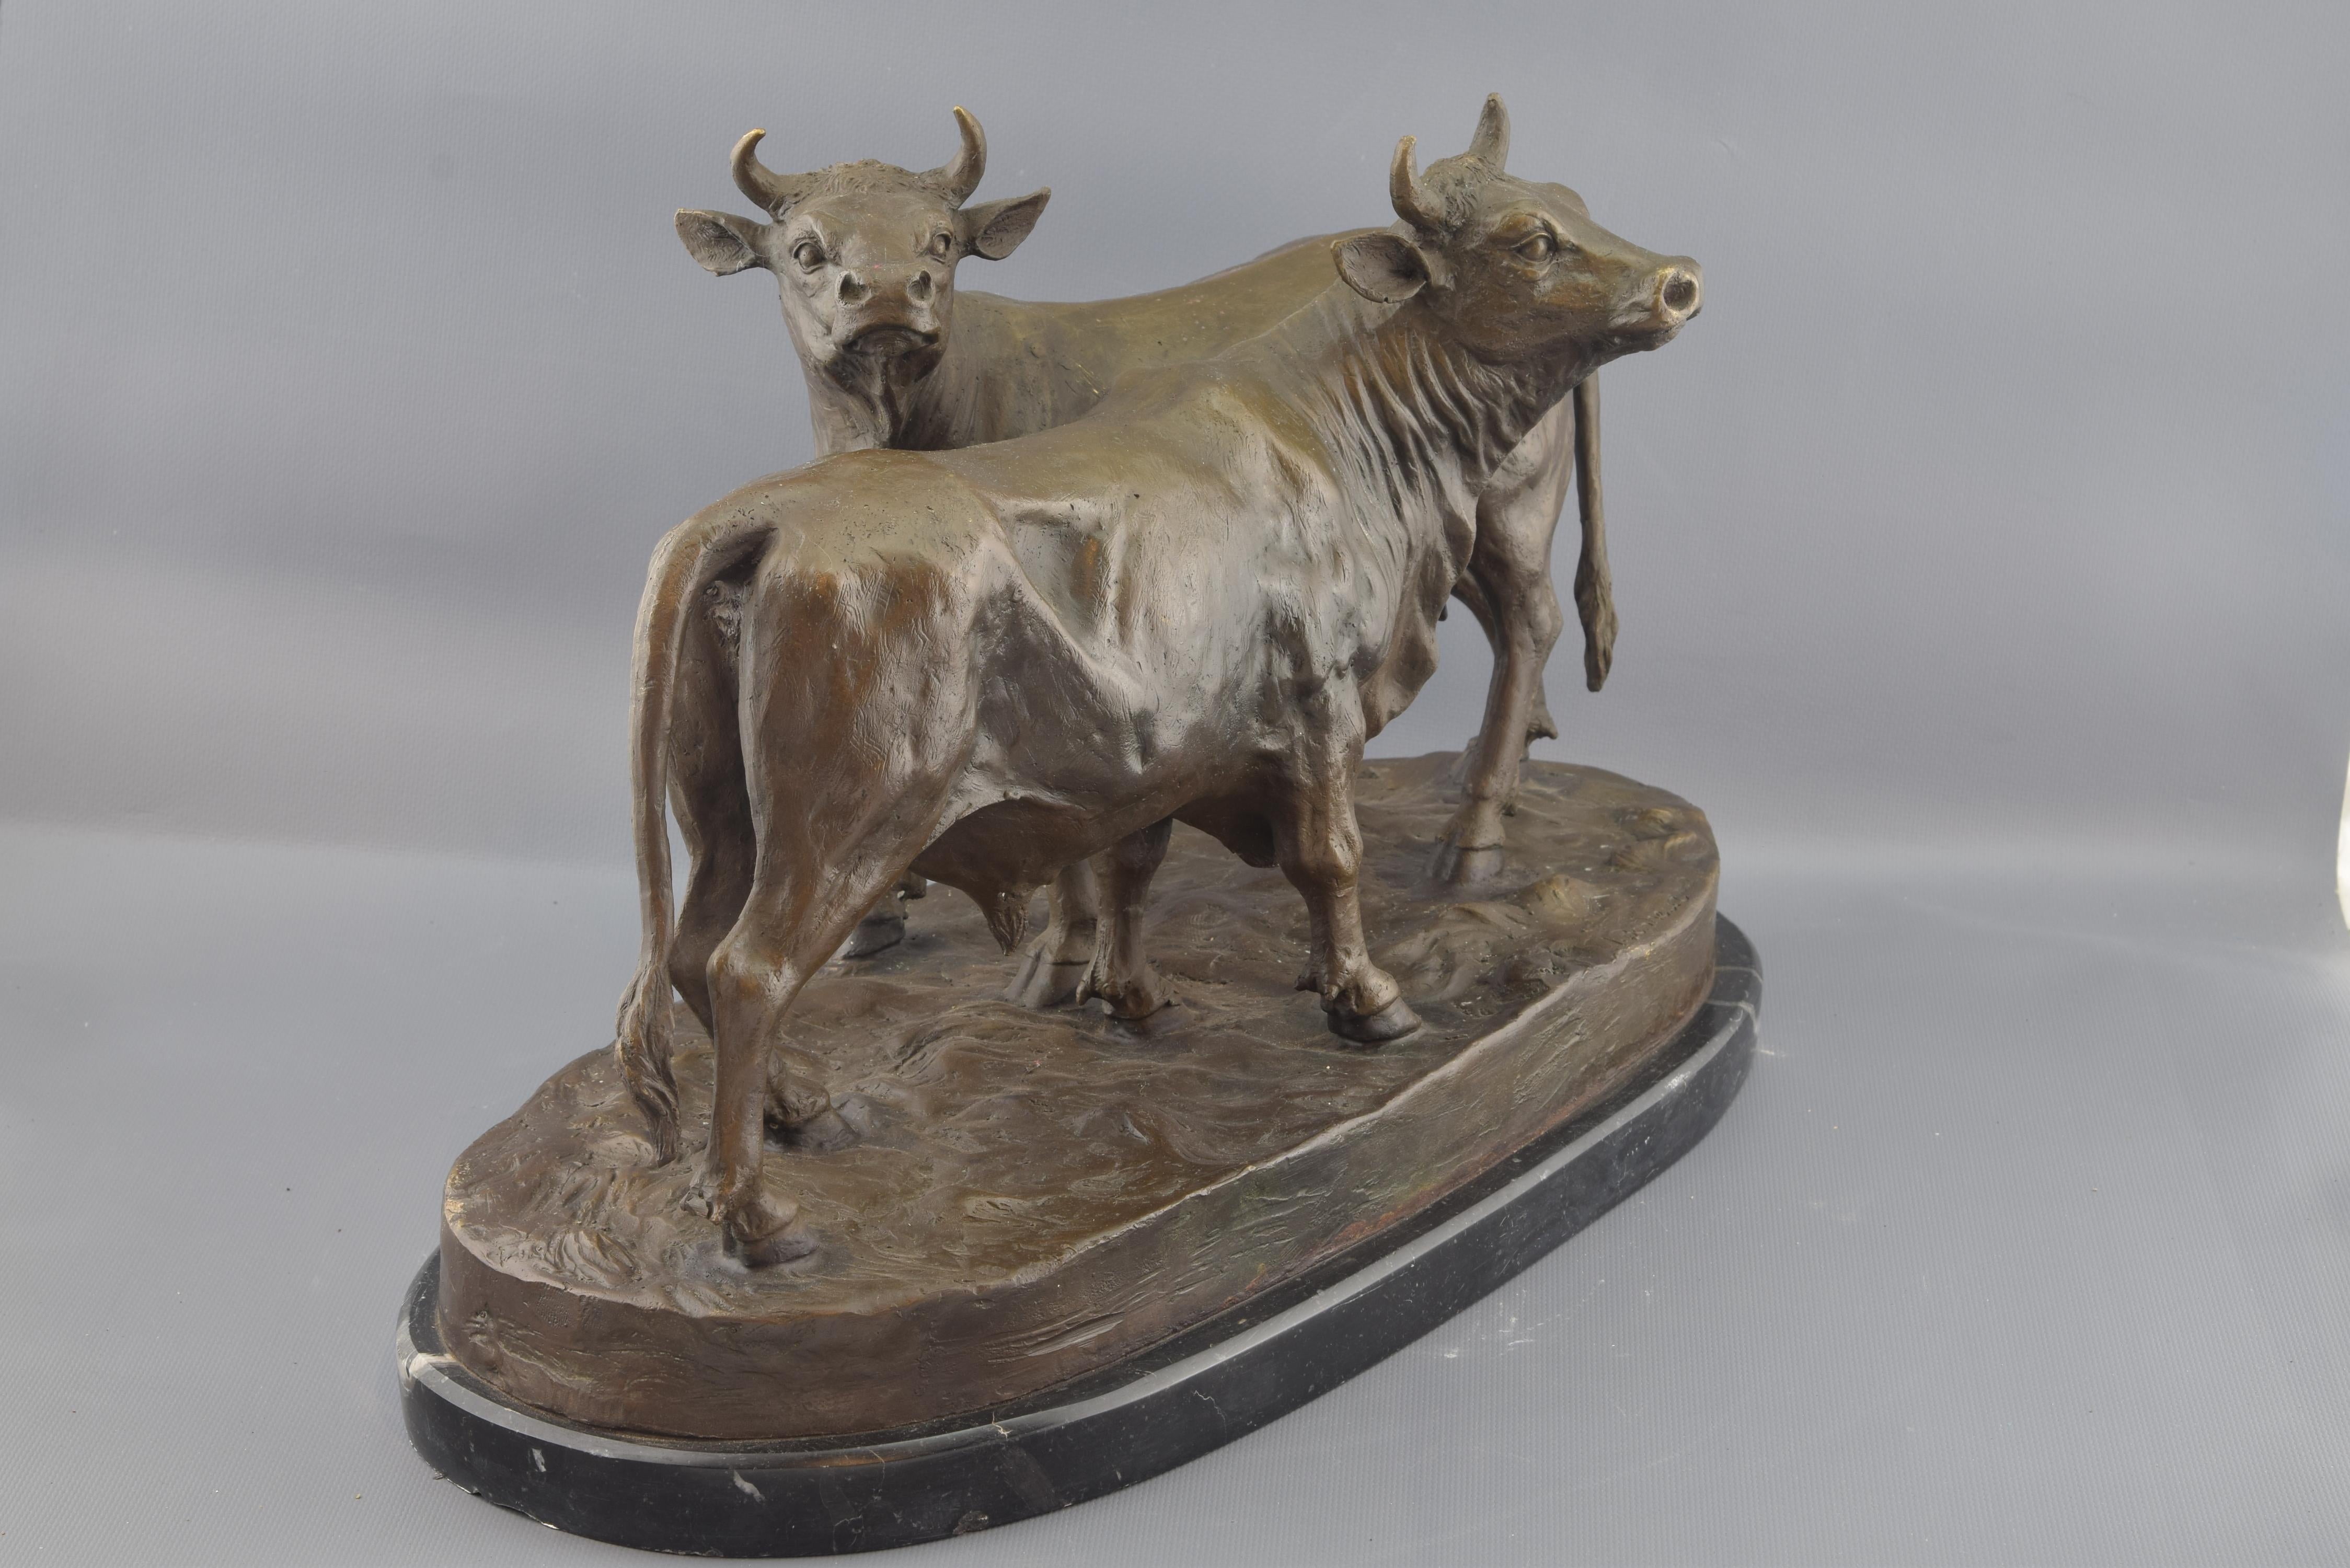 Lost wax casting. 
On an oval base in dark marble stands another, made in bronze and worked to look like a meadow. The two cattle are placed in profile, with the head of the cow higher and looking both towards the same side. The artist has been